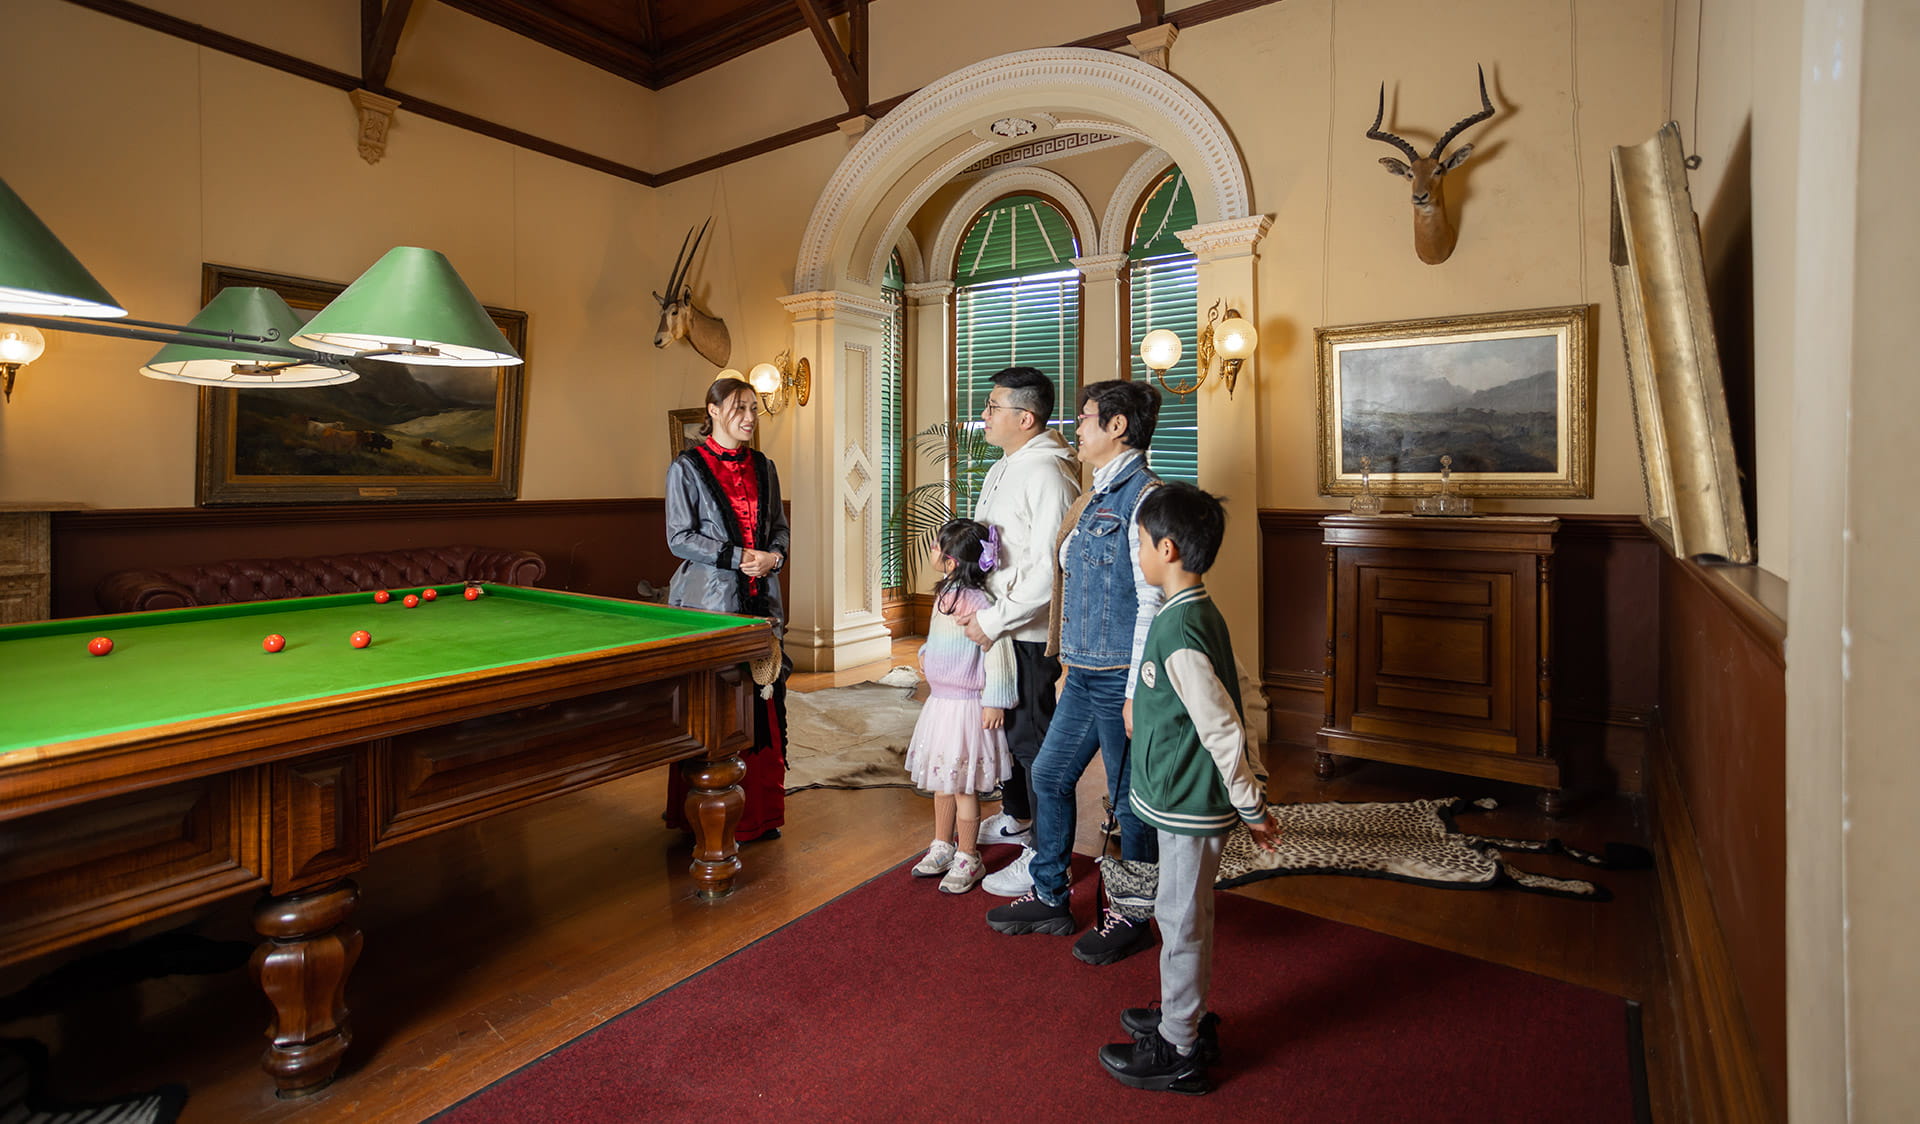 A tour guide in period costume speaking to a family in the Billiard Room at Werribee Mansion.